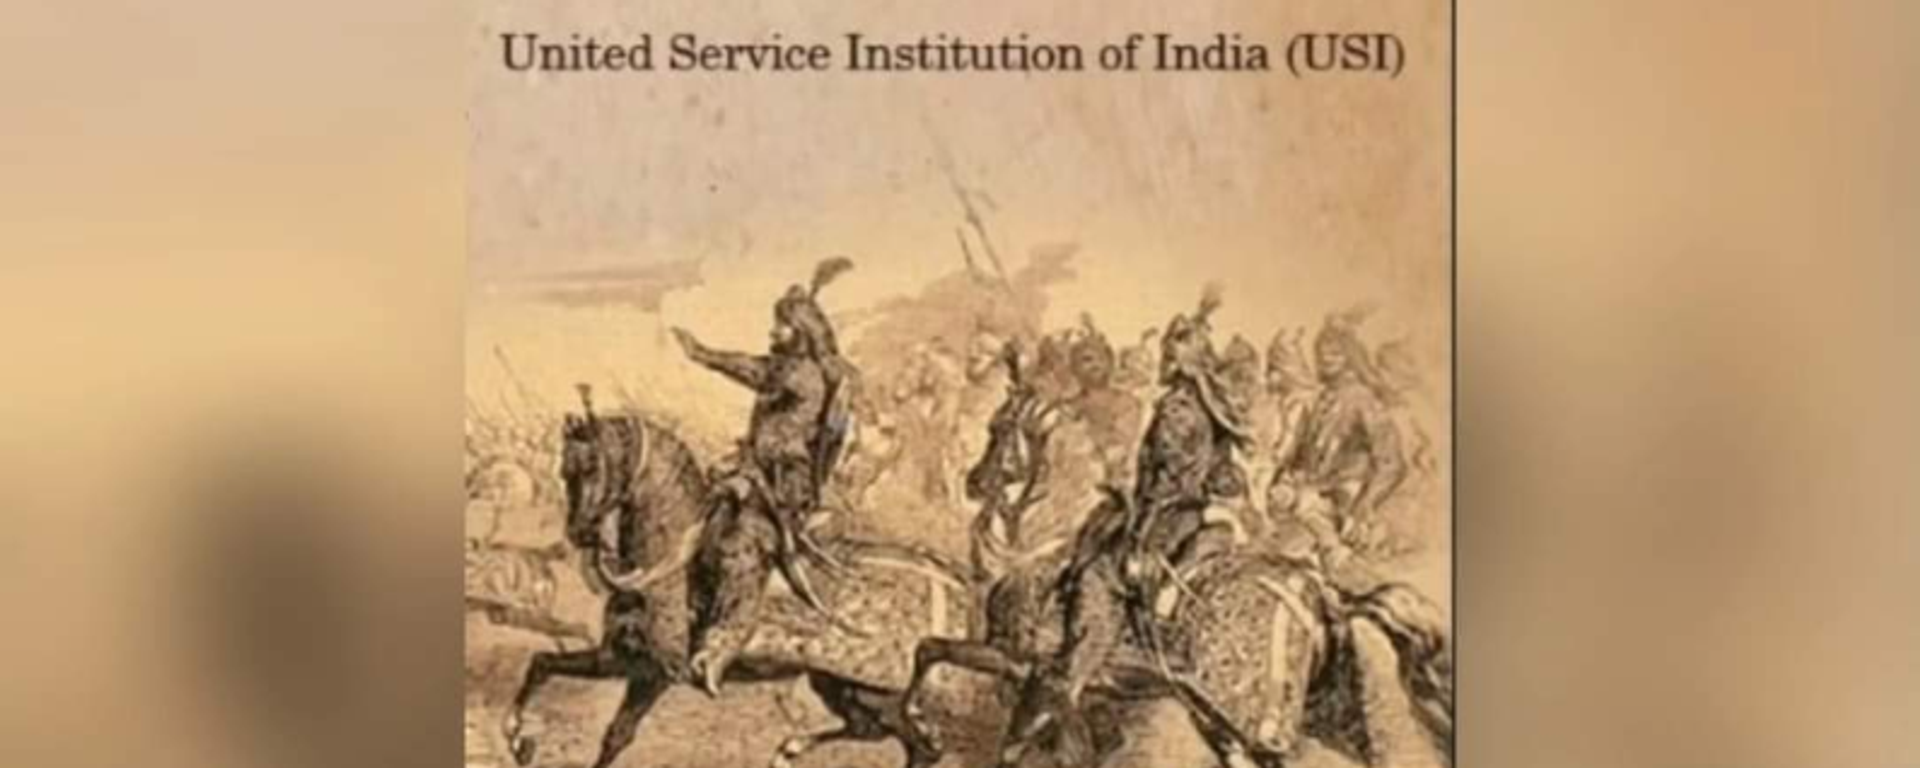 Indian Army launches 'Project Udbhav' to revive and rediscover India’s age-old wisdom in statecraft, strategy, diplomacy and warfare. - Sputnik India, 1920, 30.09.2023